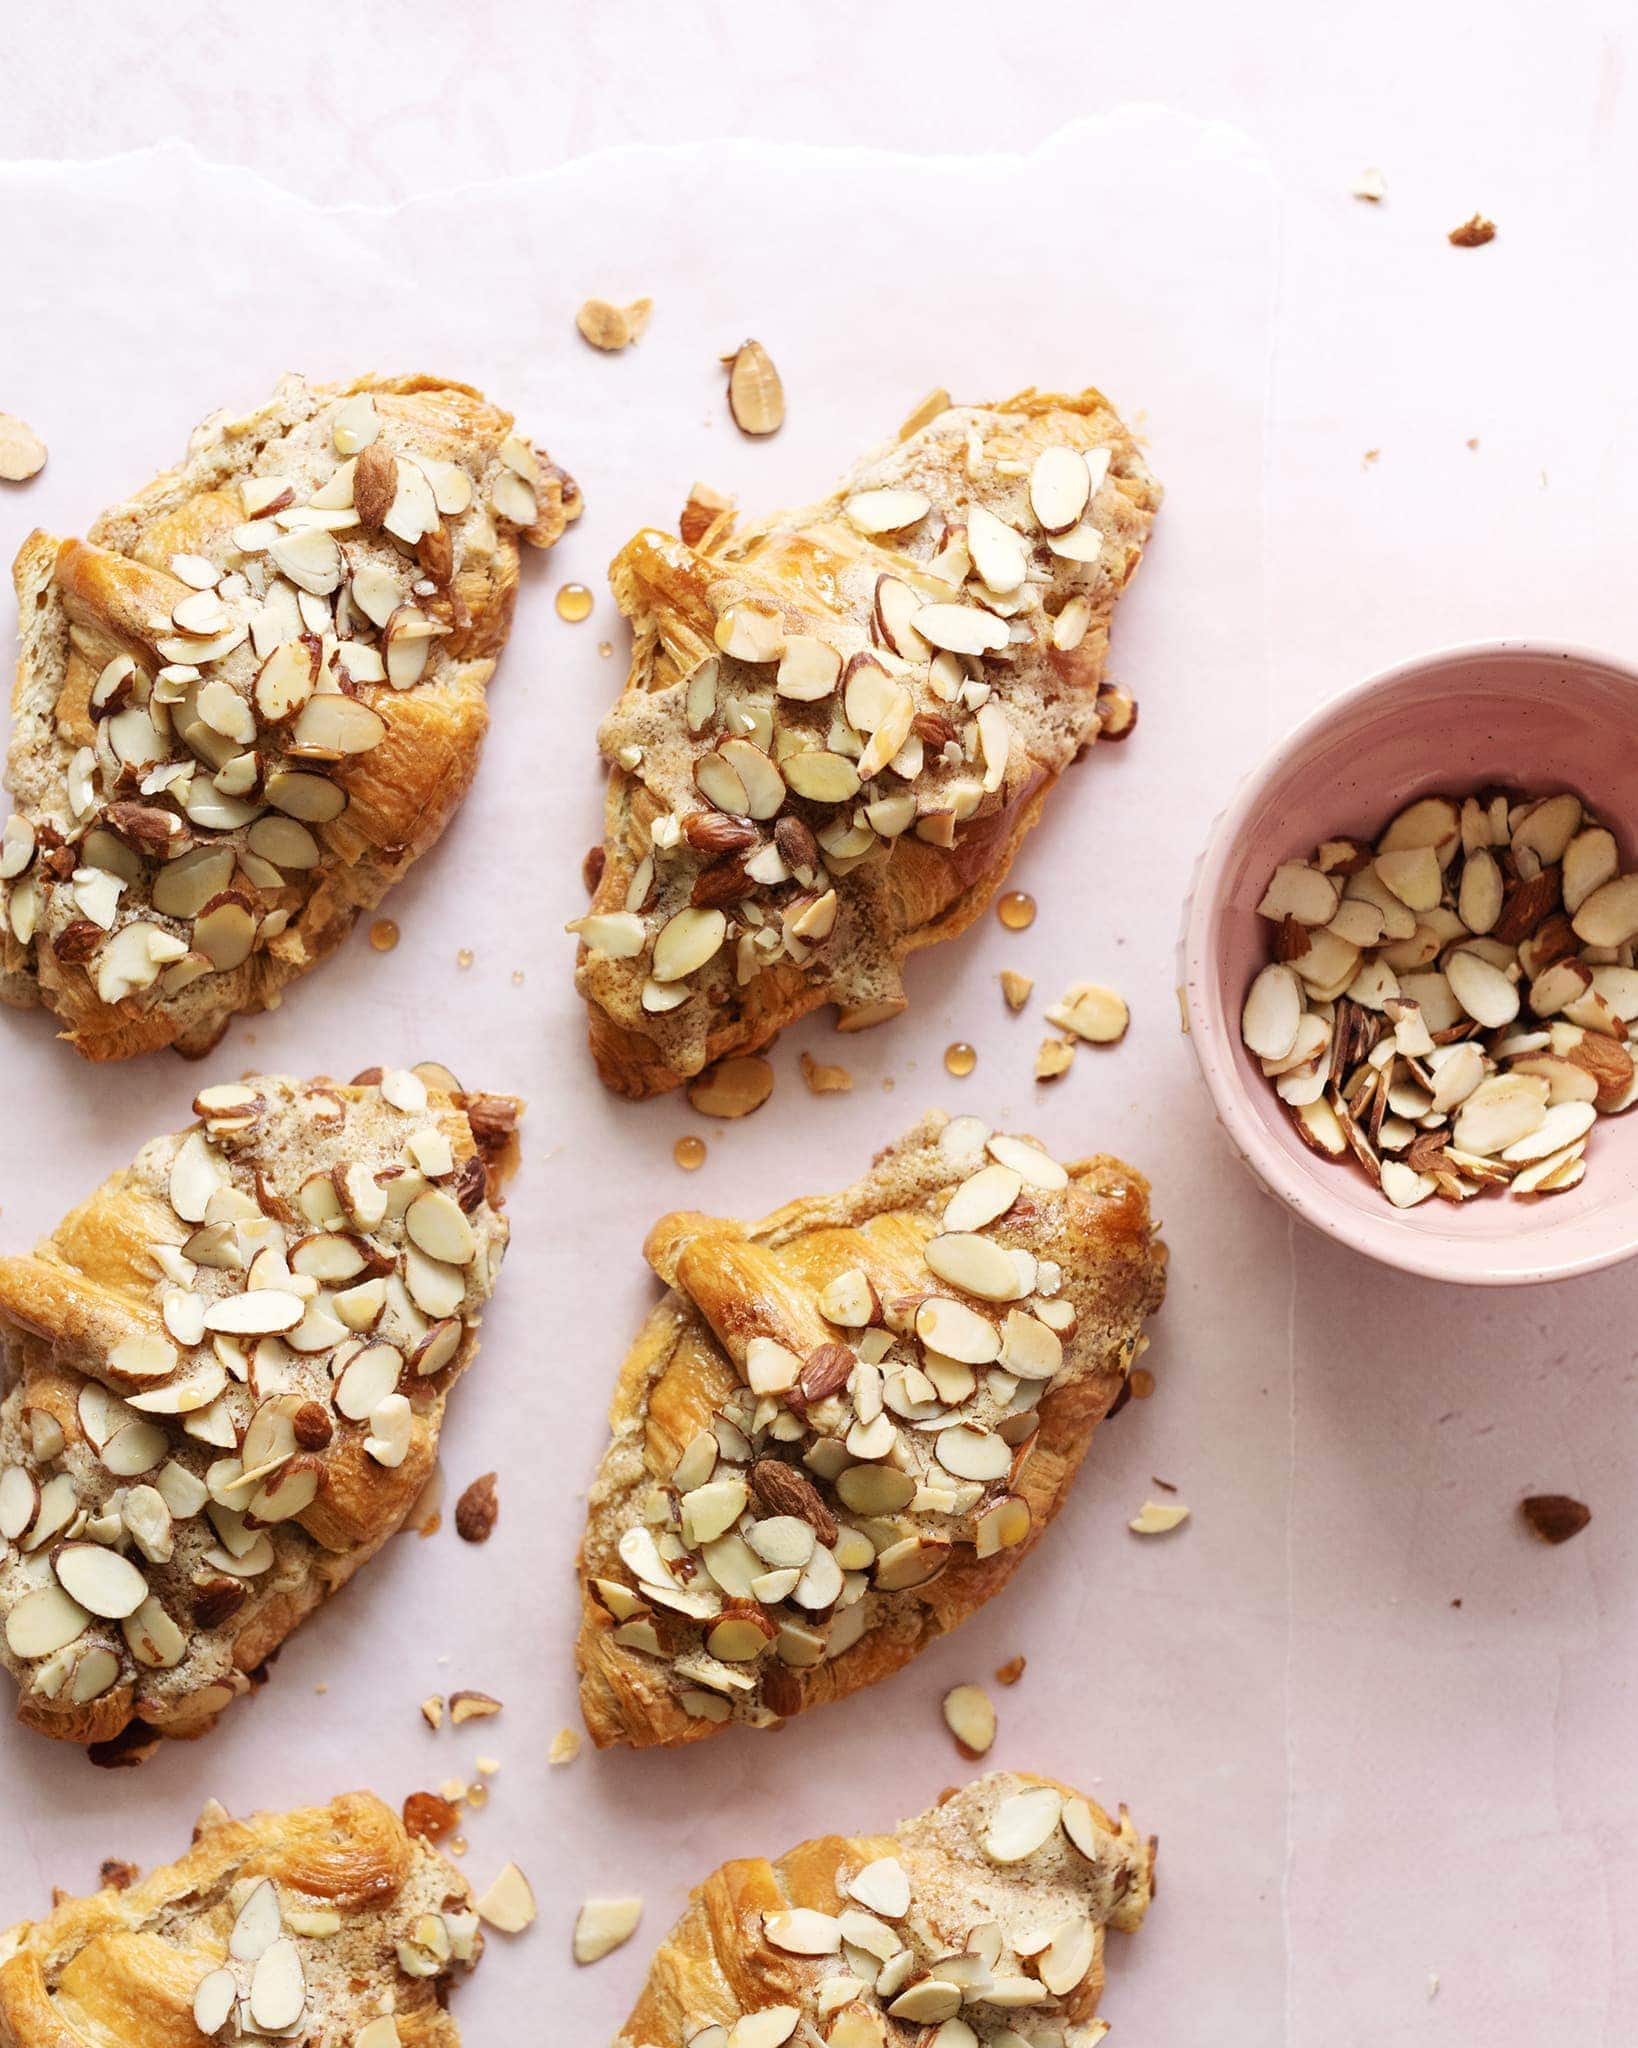 Overhead view of almond croissants sprinkled with sliced almonds on pink background